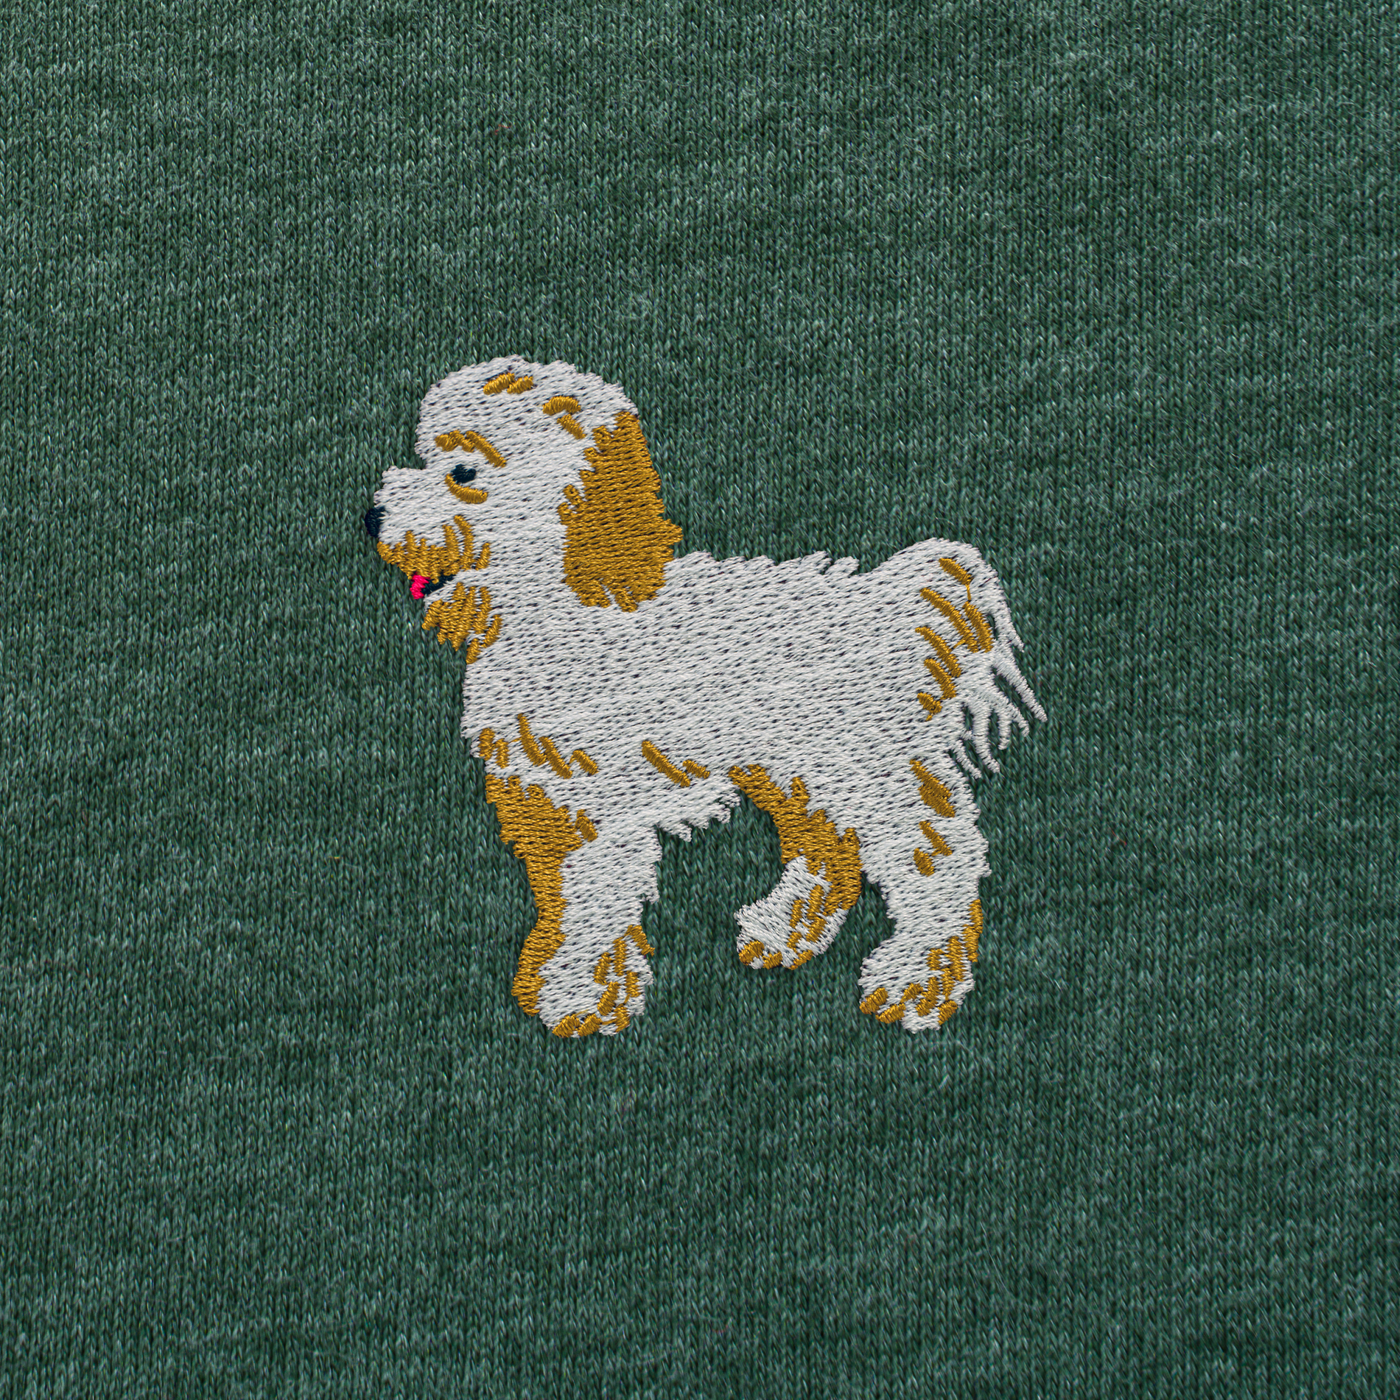 Bobby's Planet Kids Embroidered Poodle T-Shirt from Bobbys Planet Toy Poodle Collection in Heather Forest Color#color_heather-forest